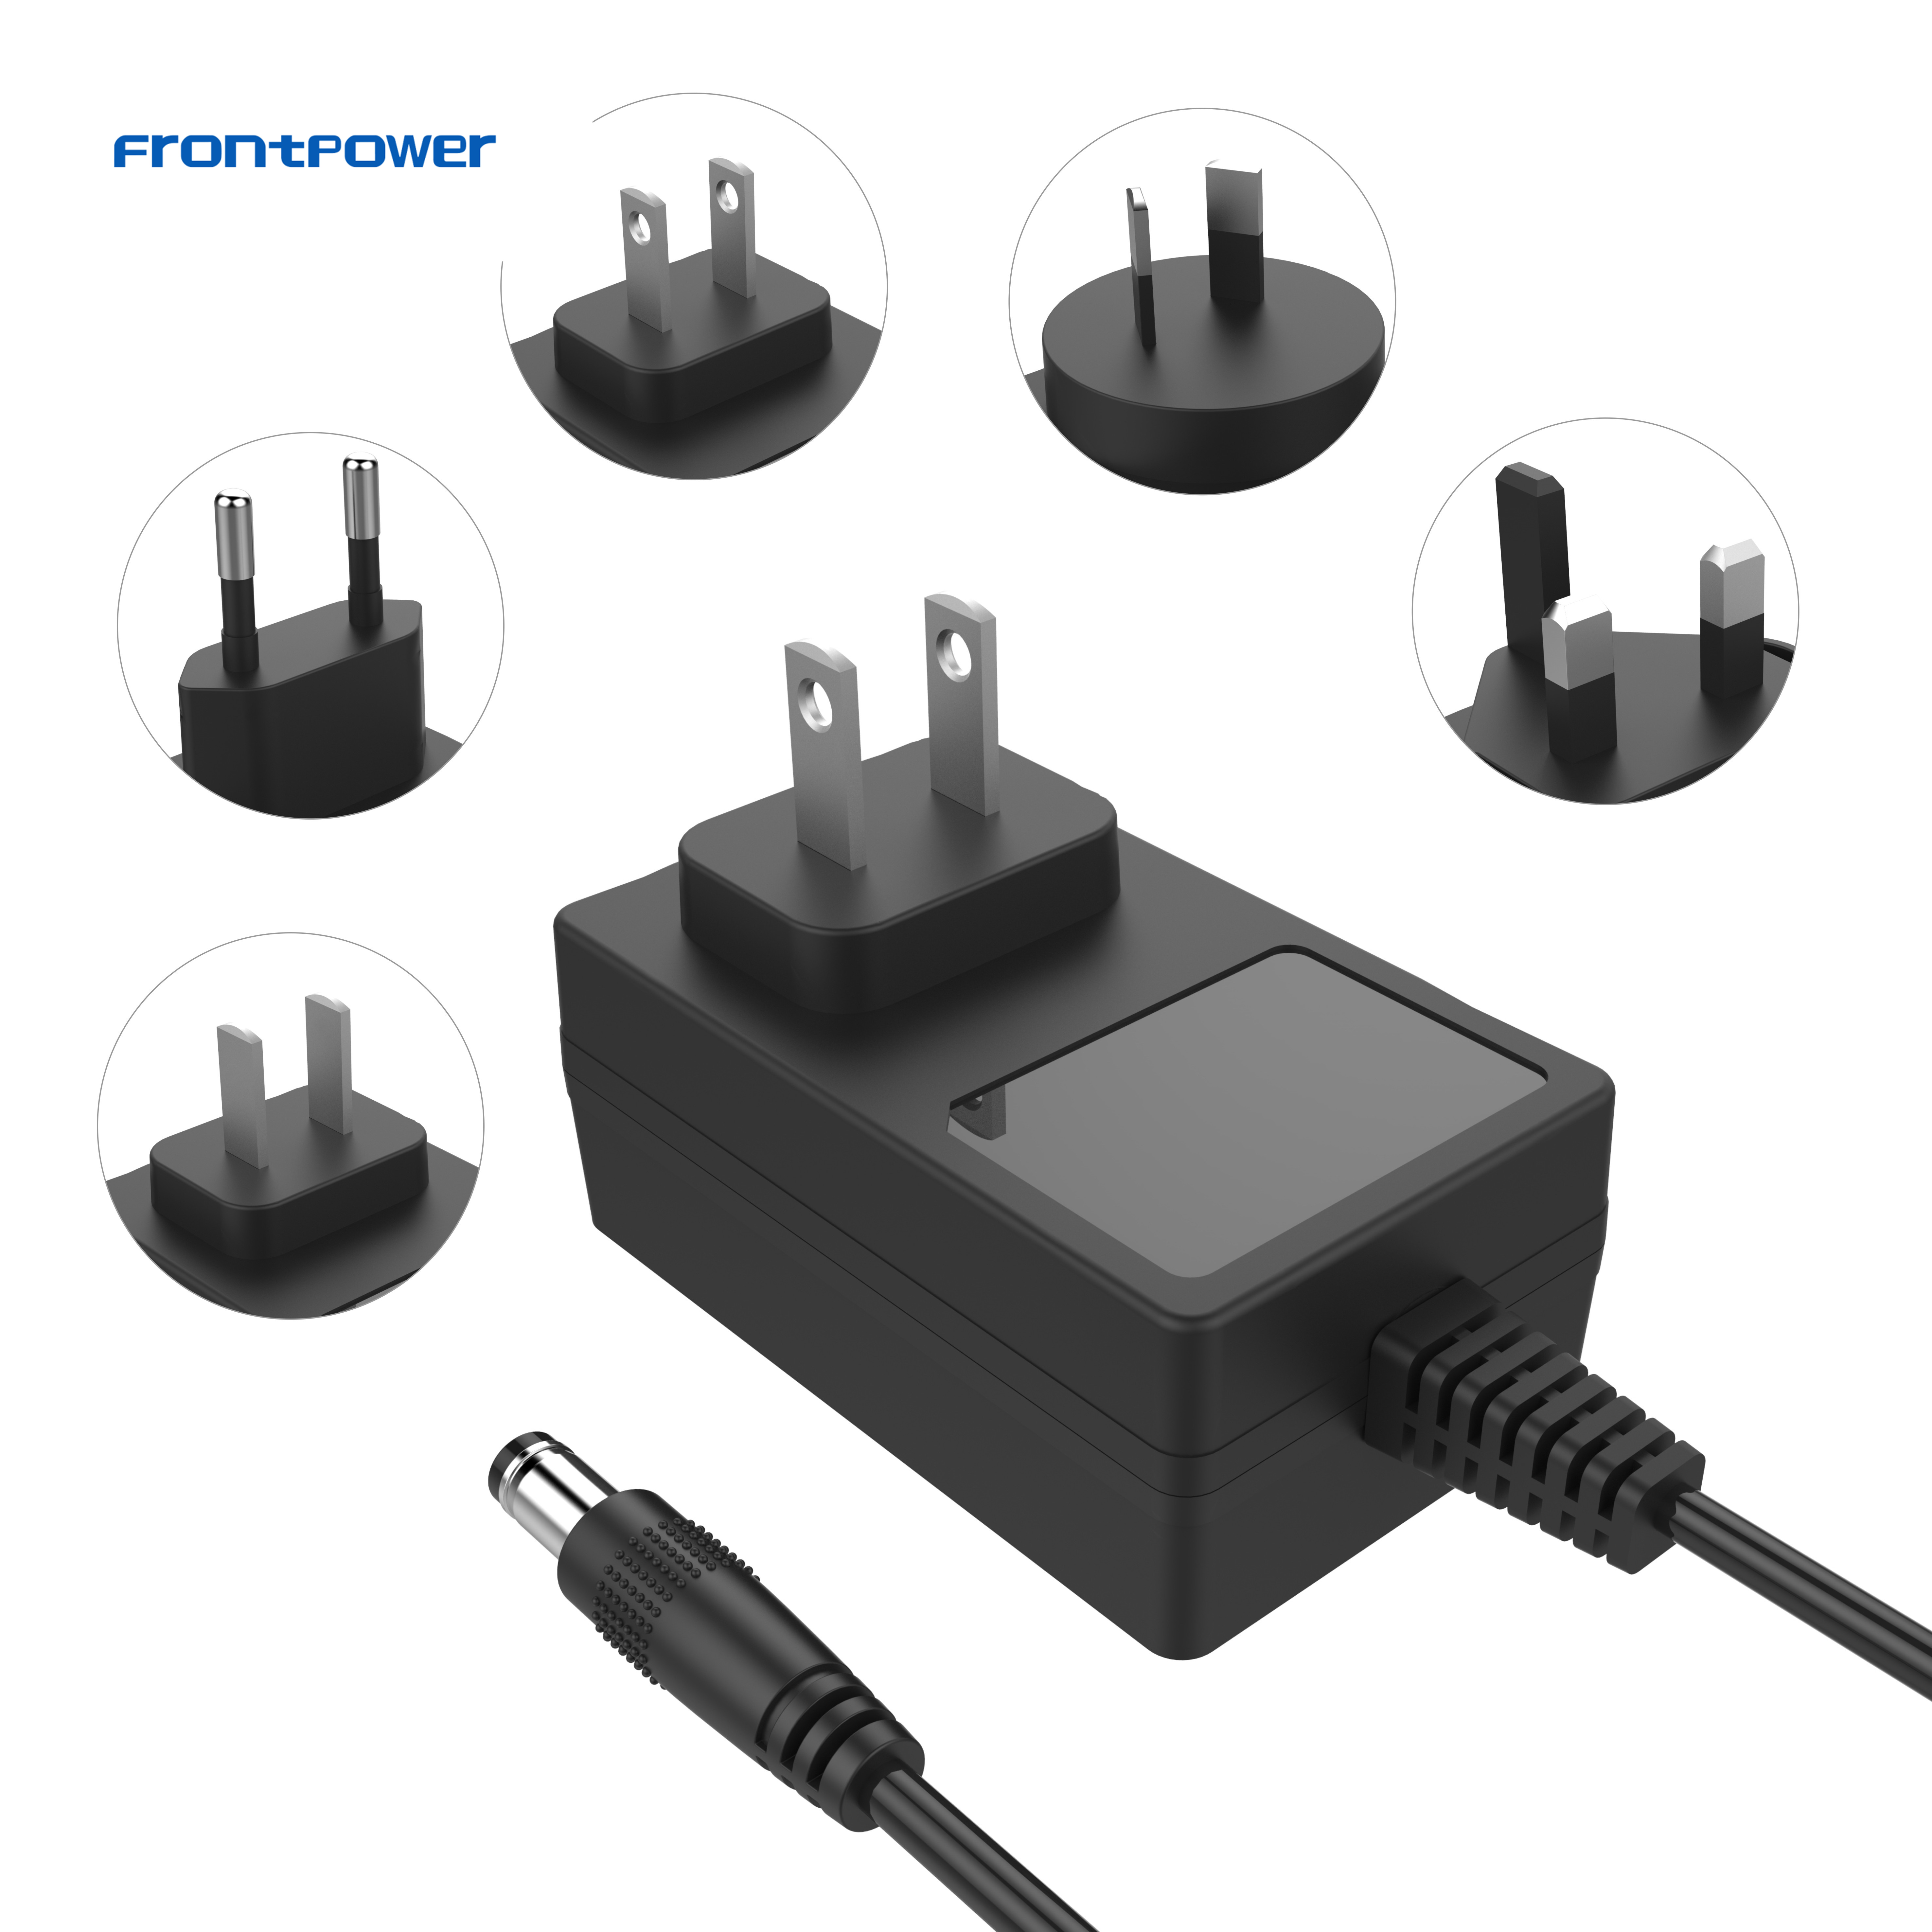 9V 12V 24V 1.25A 2.5A 3A US EU UK AU PSE JP IND SAA Wall Mount Plug Power Adapter Supply ACDC Charger SMPS